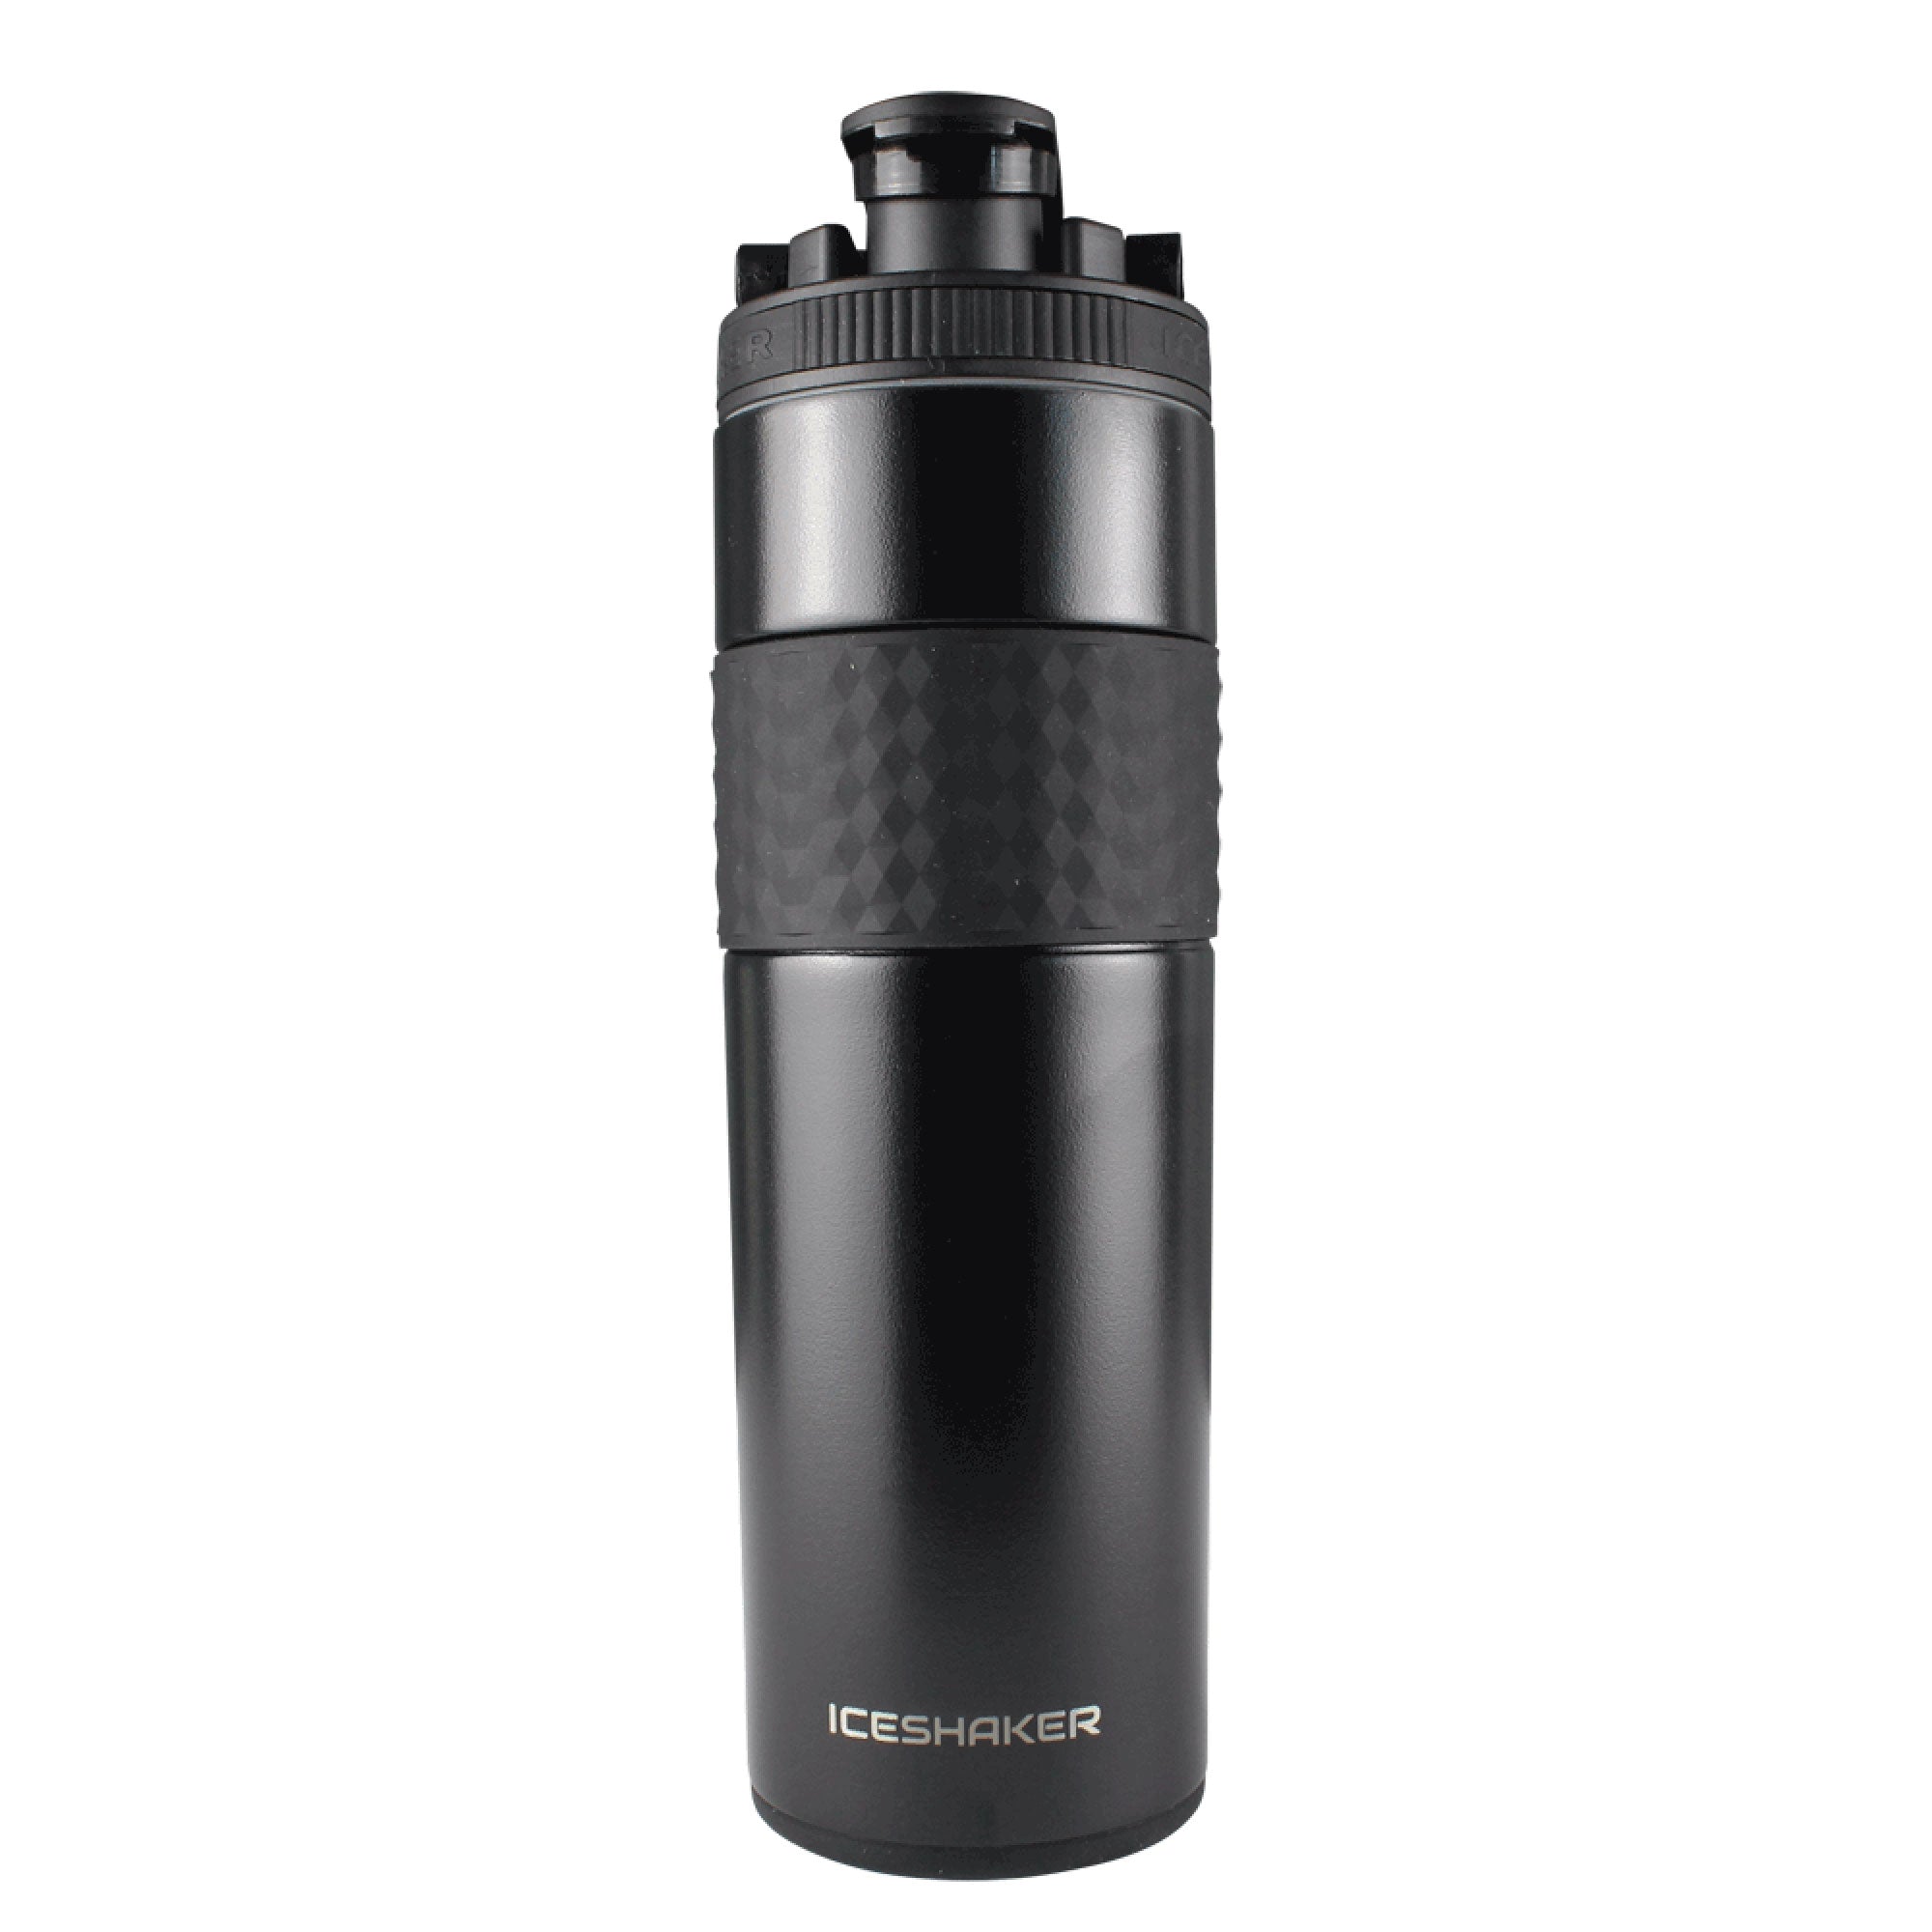 WAASS Double Wall Vacuum Insulated Protein Shaker Bottle with Mixer Ba